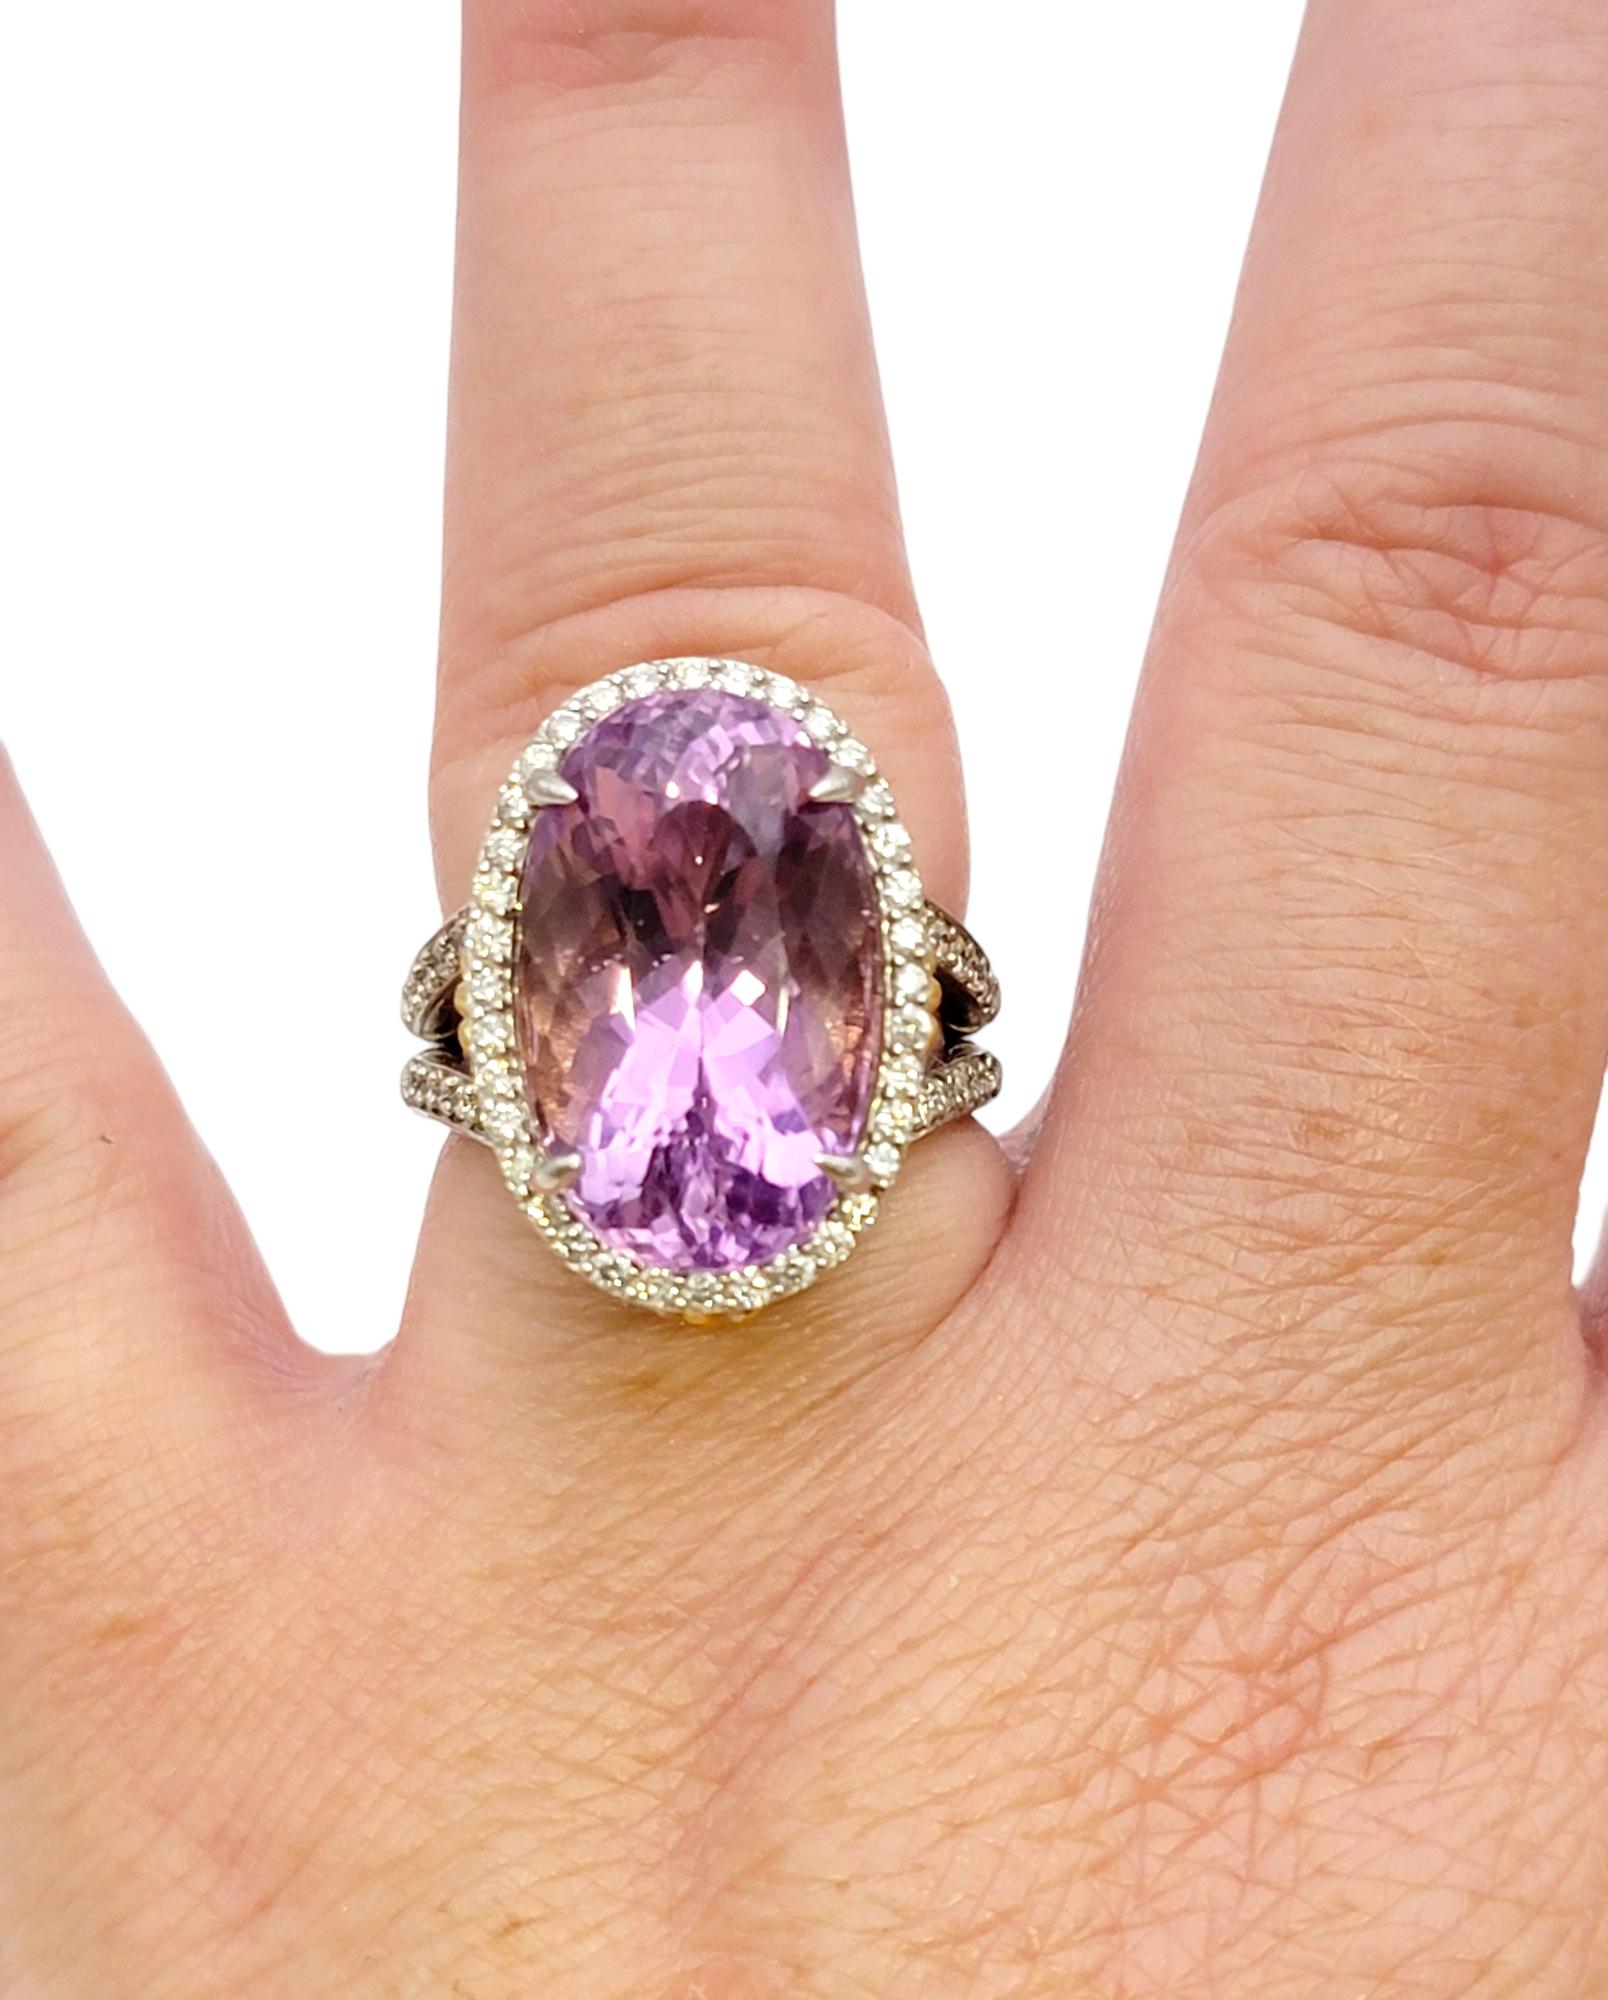 Stambolian Oval Kunzite with Diamond Halo and Green Enamel High Profile Ring 13